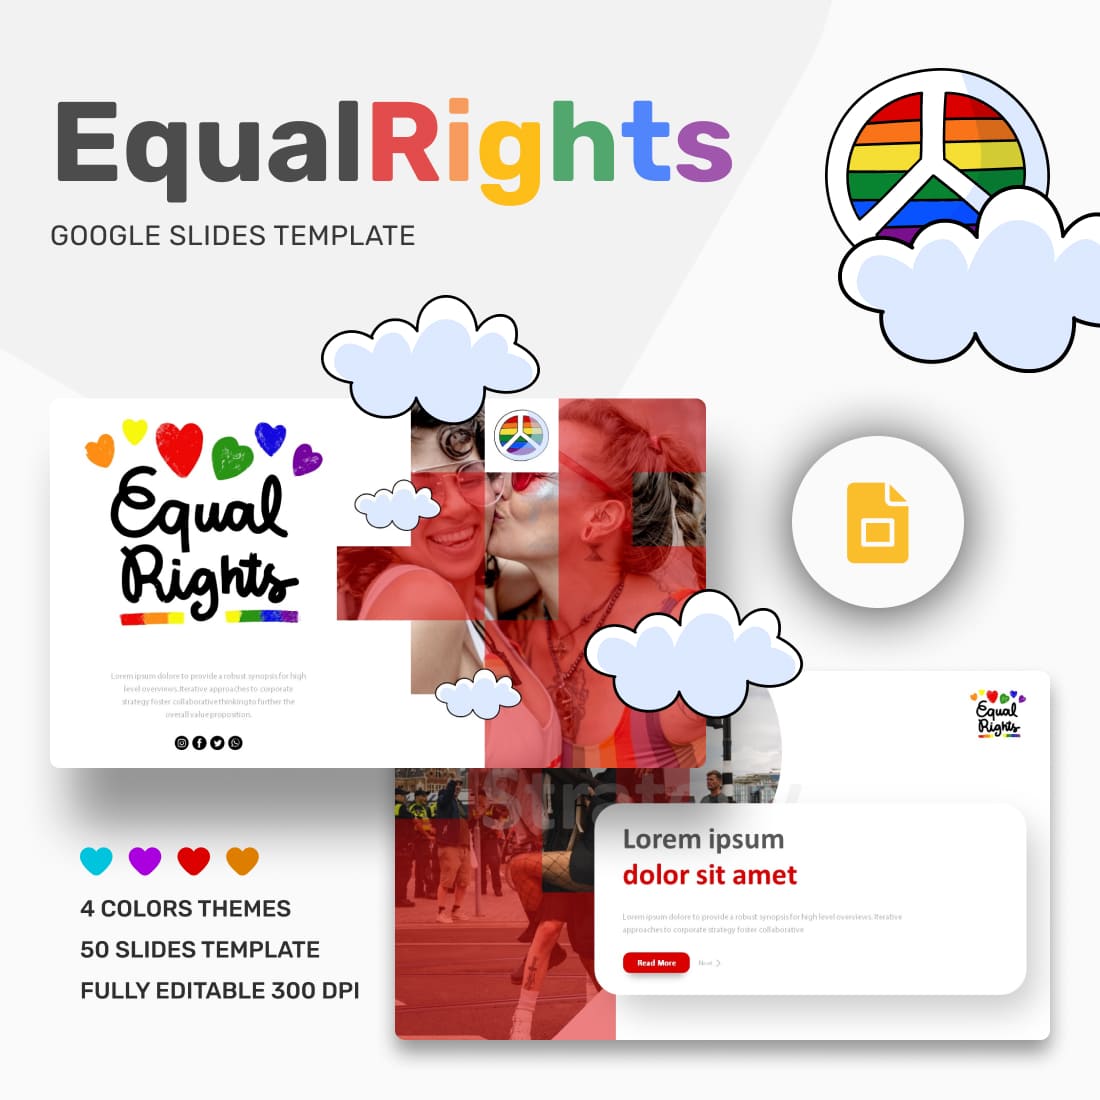 Equal Rights Google Slides Theme cover.